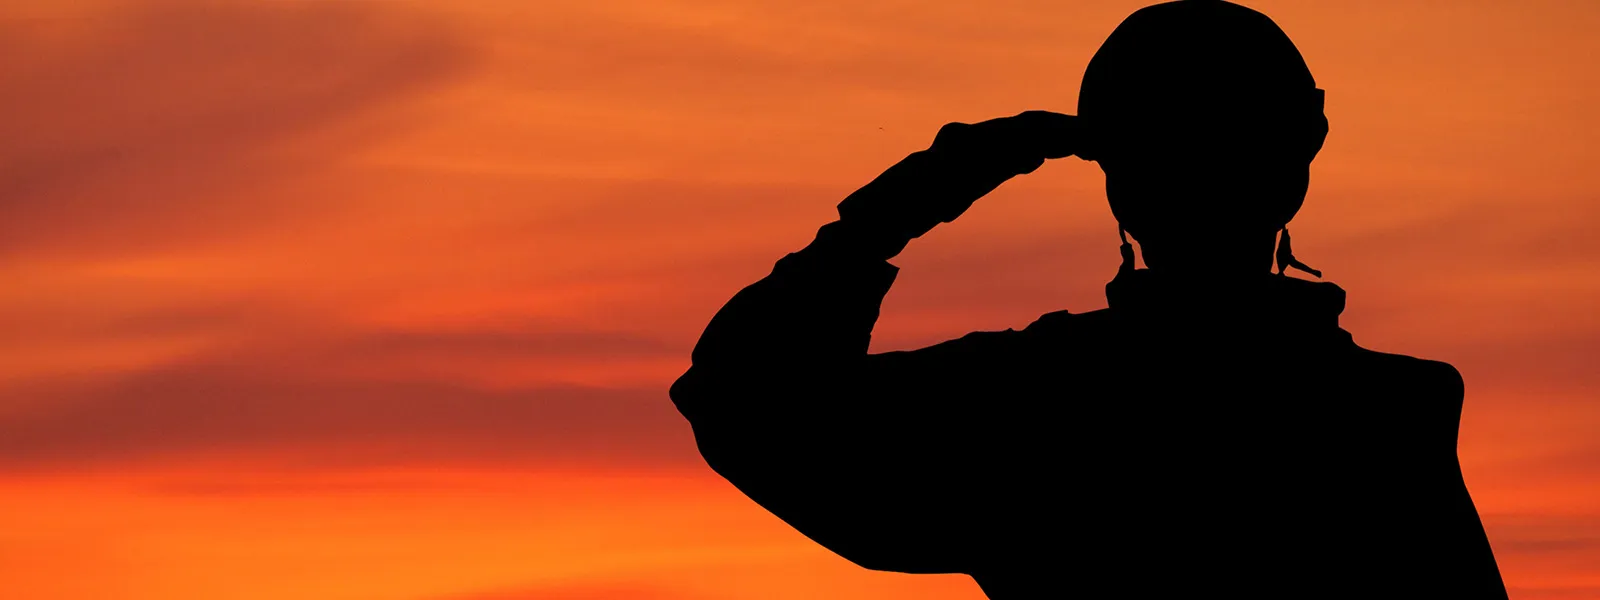 silhouette of a person saluting